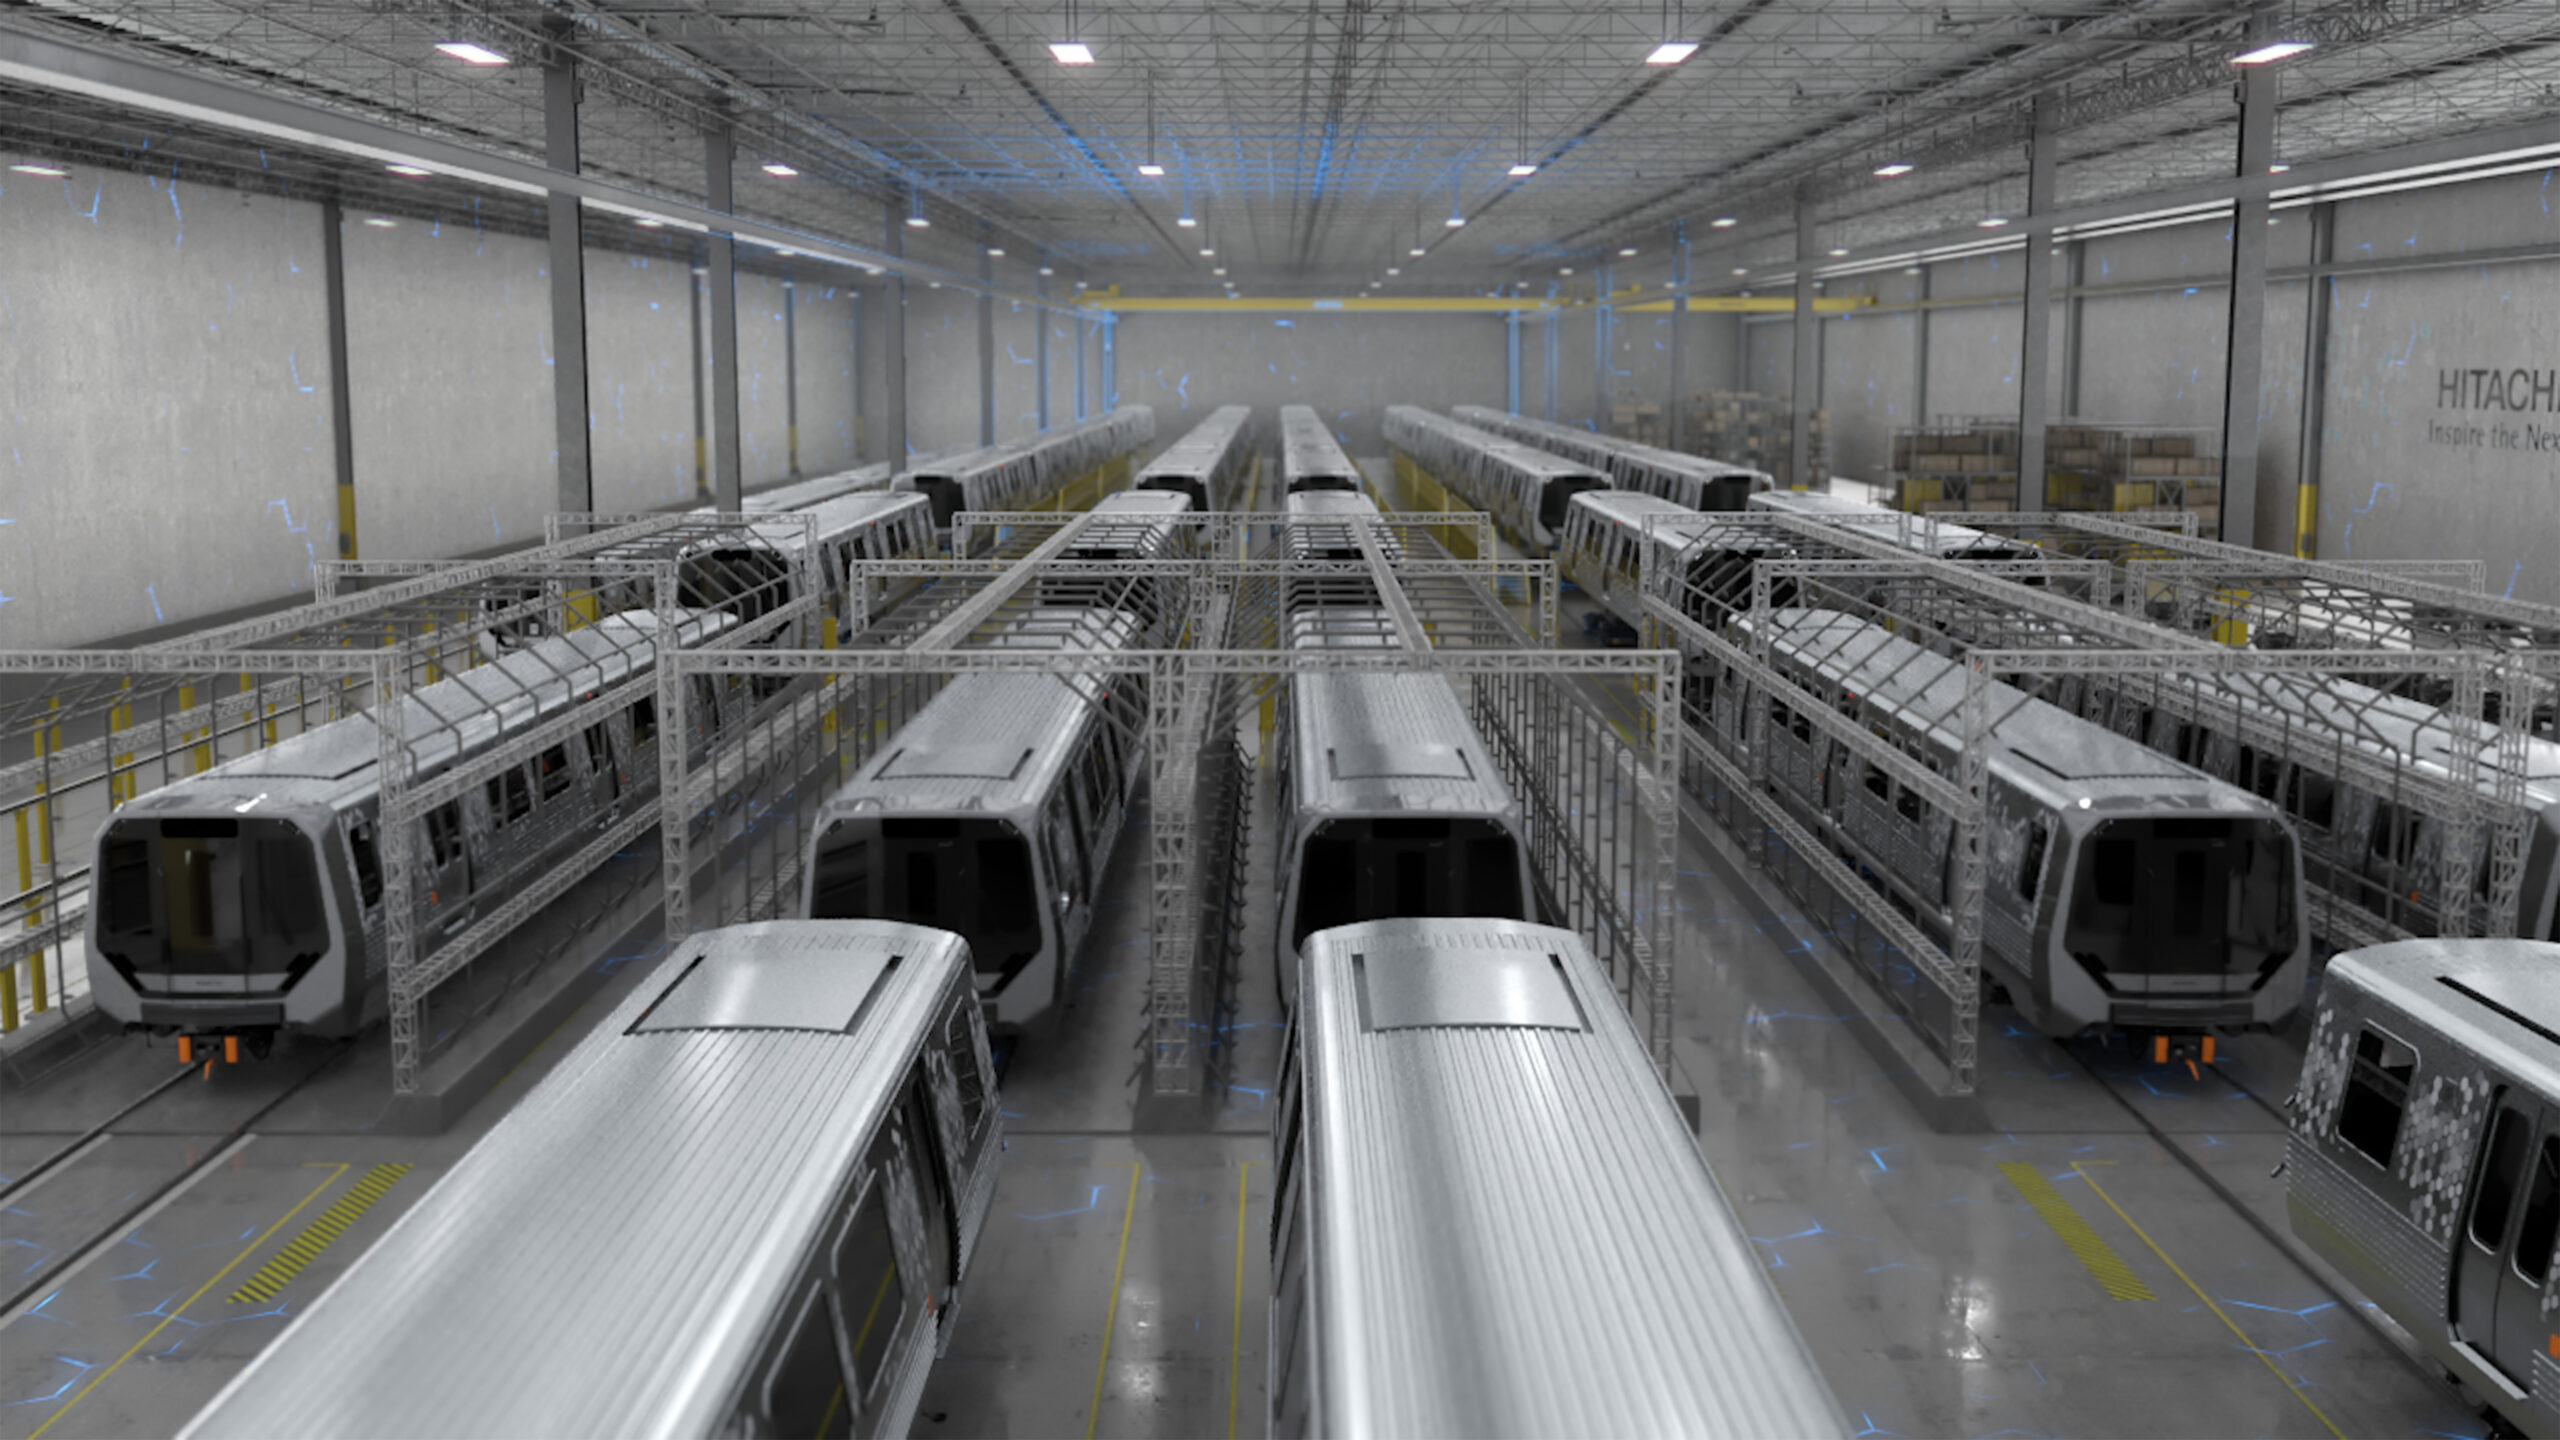 Hitachi Rail Shares Final Design of New Hagerstown, Maryland Factory and Test Track